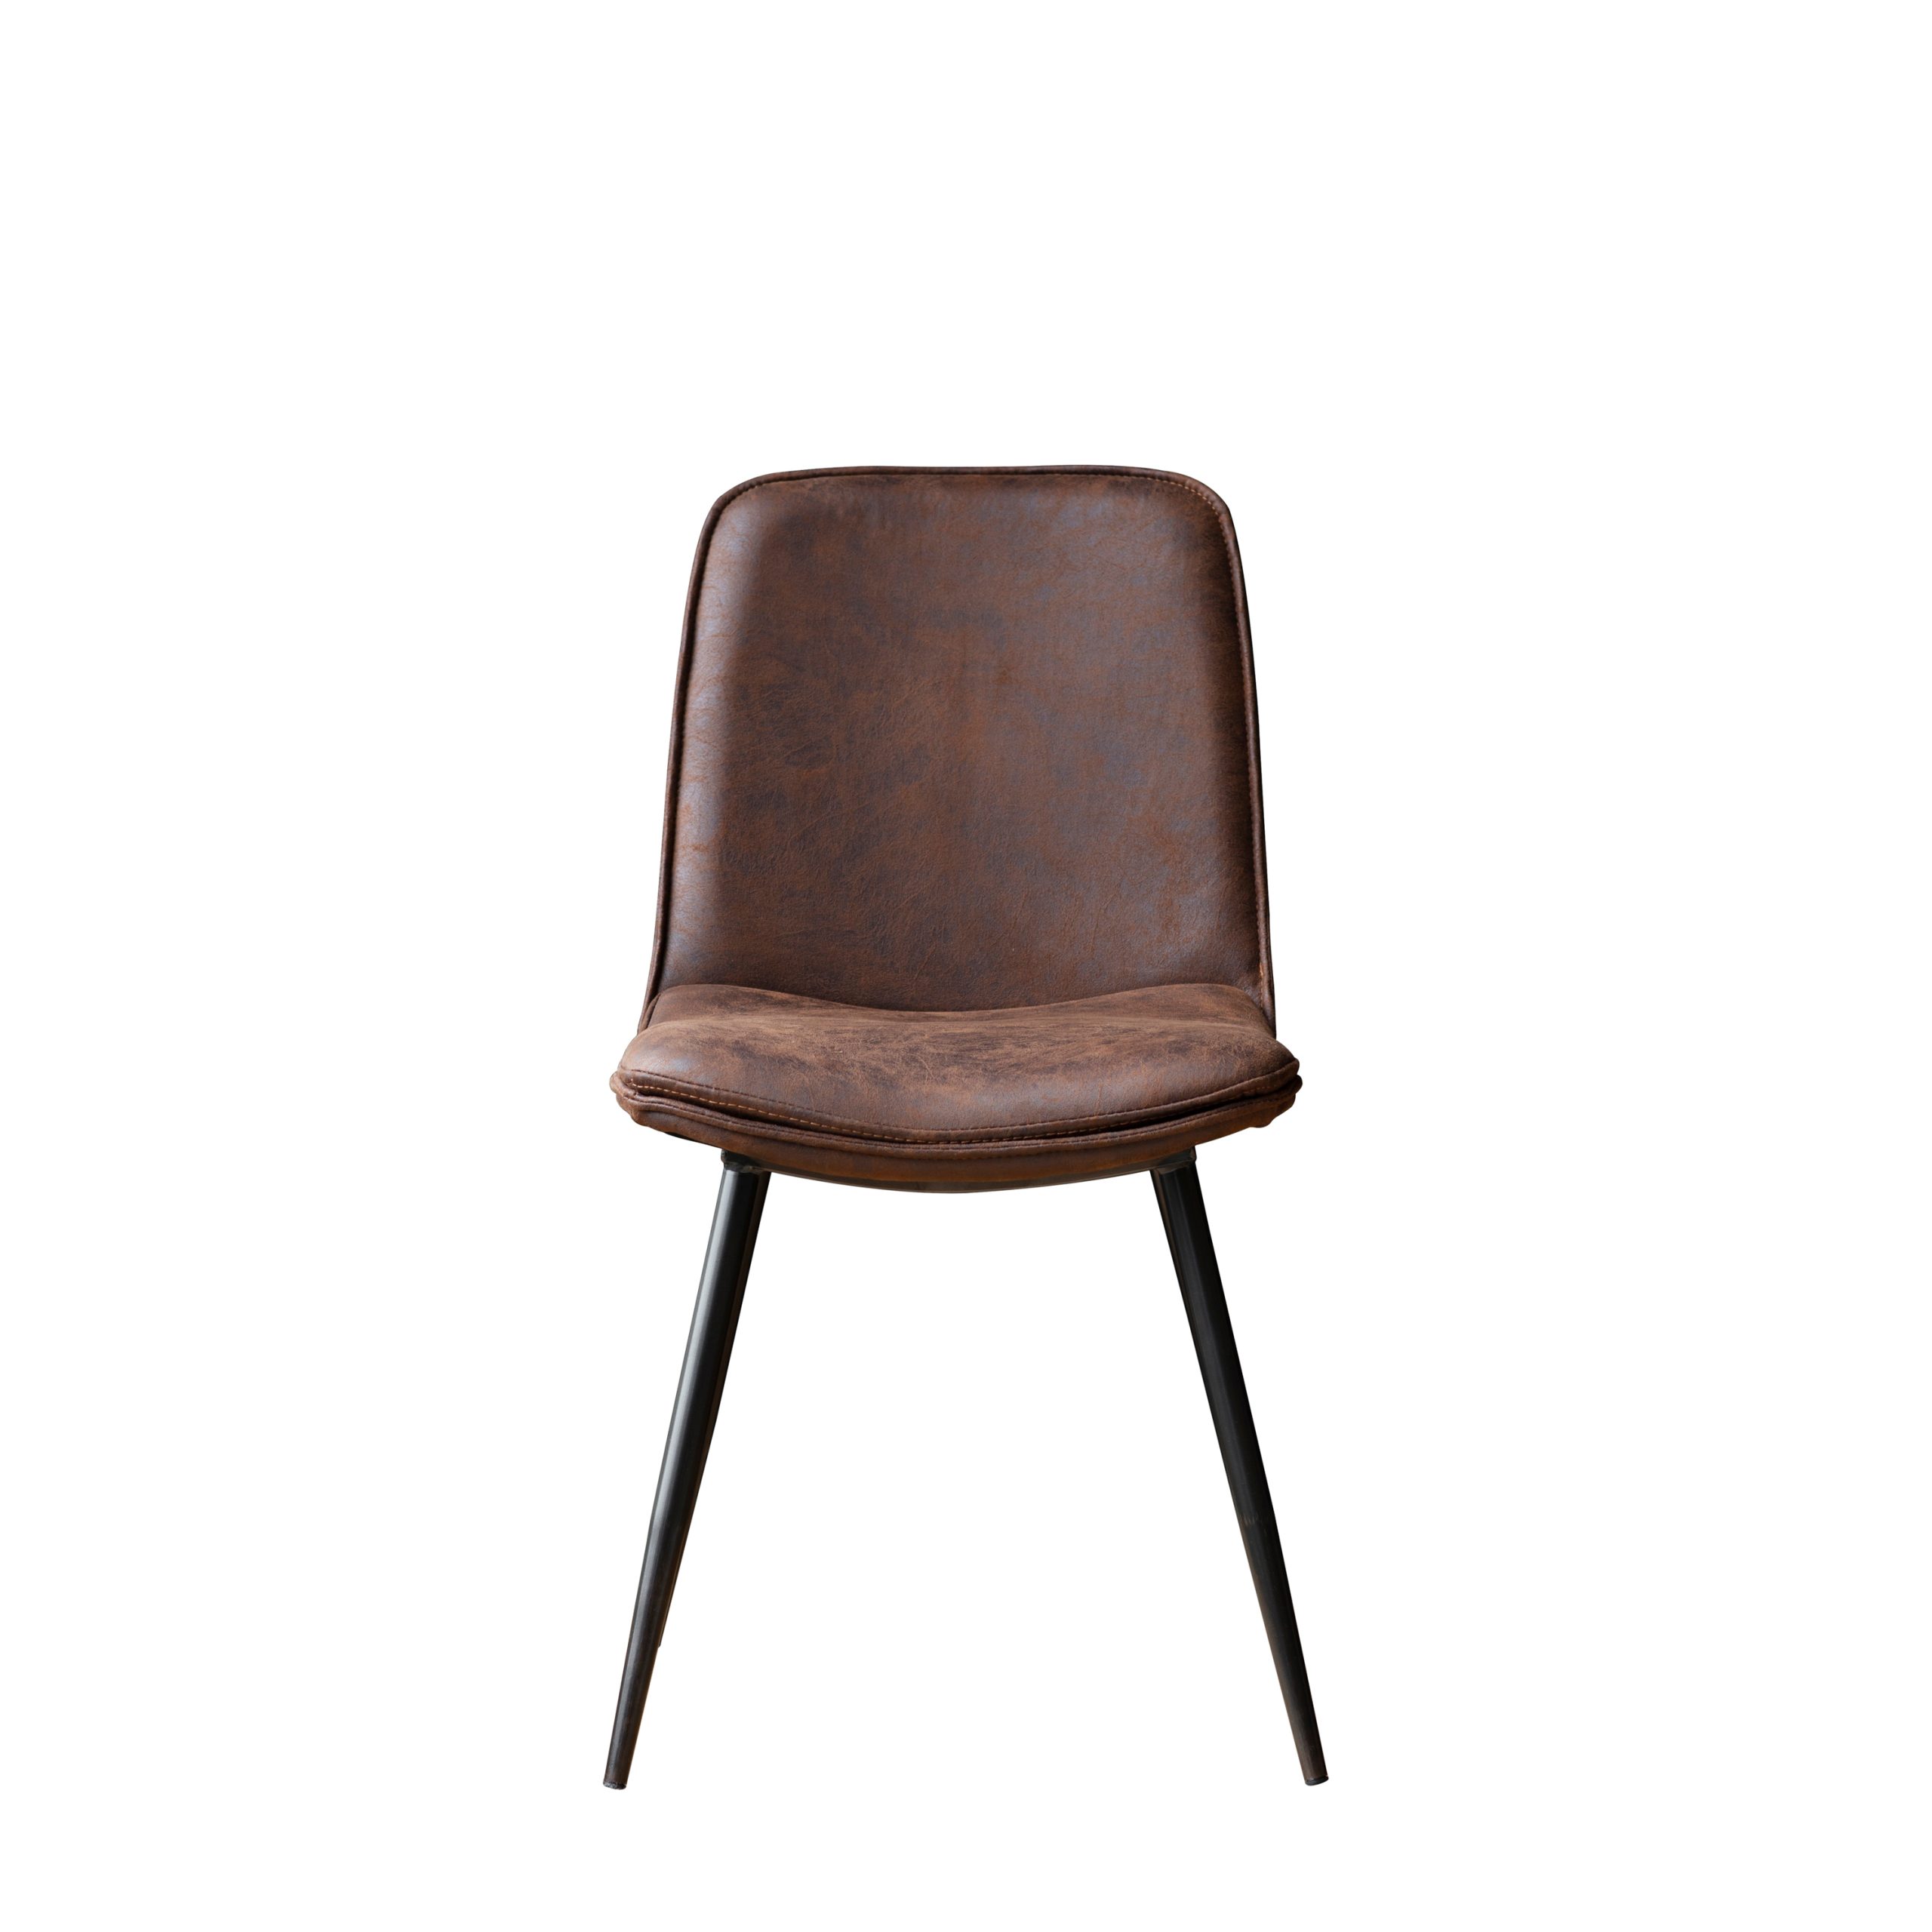 Gallery Direct Newton Chair Brown (Set of 2)